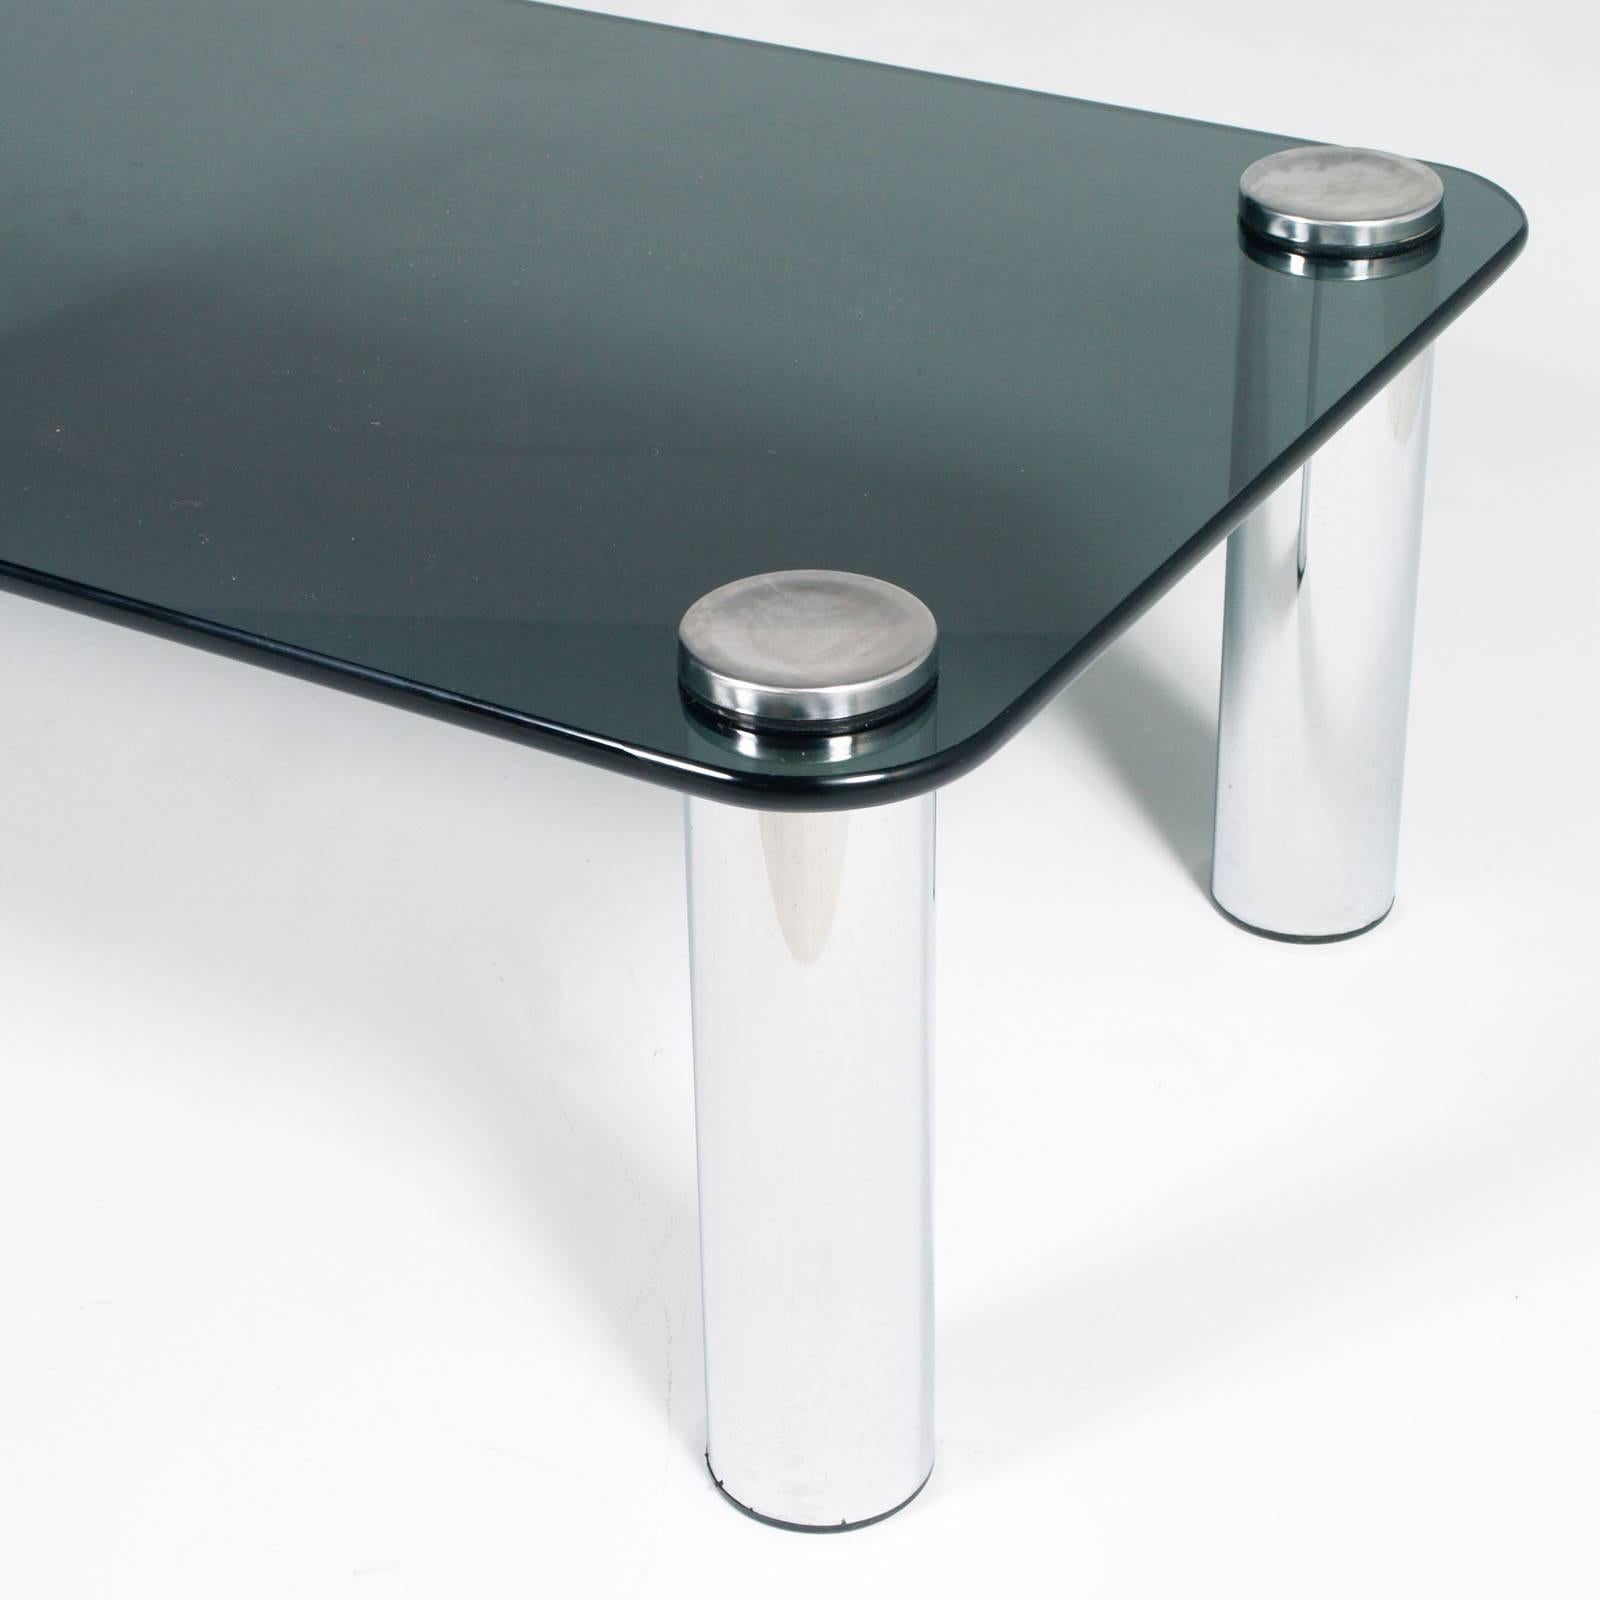 Mid-Century Modern Coffee Center Table by Marco Zanuso for Zanotta Chrome and Smoked Glass For Sale